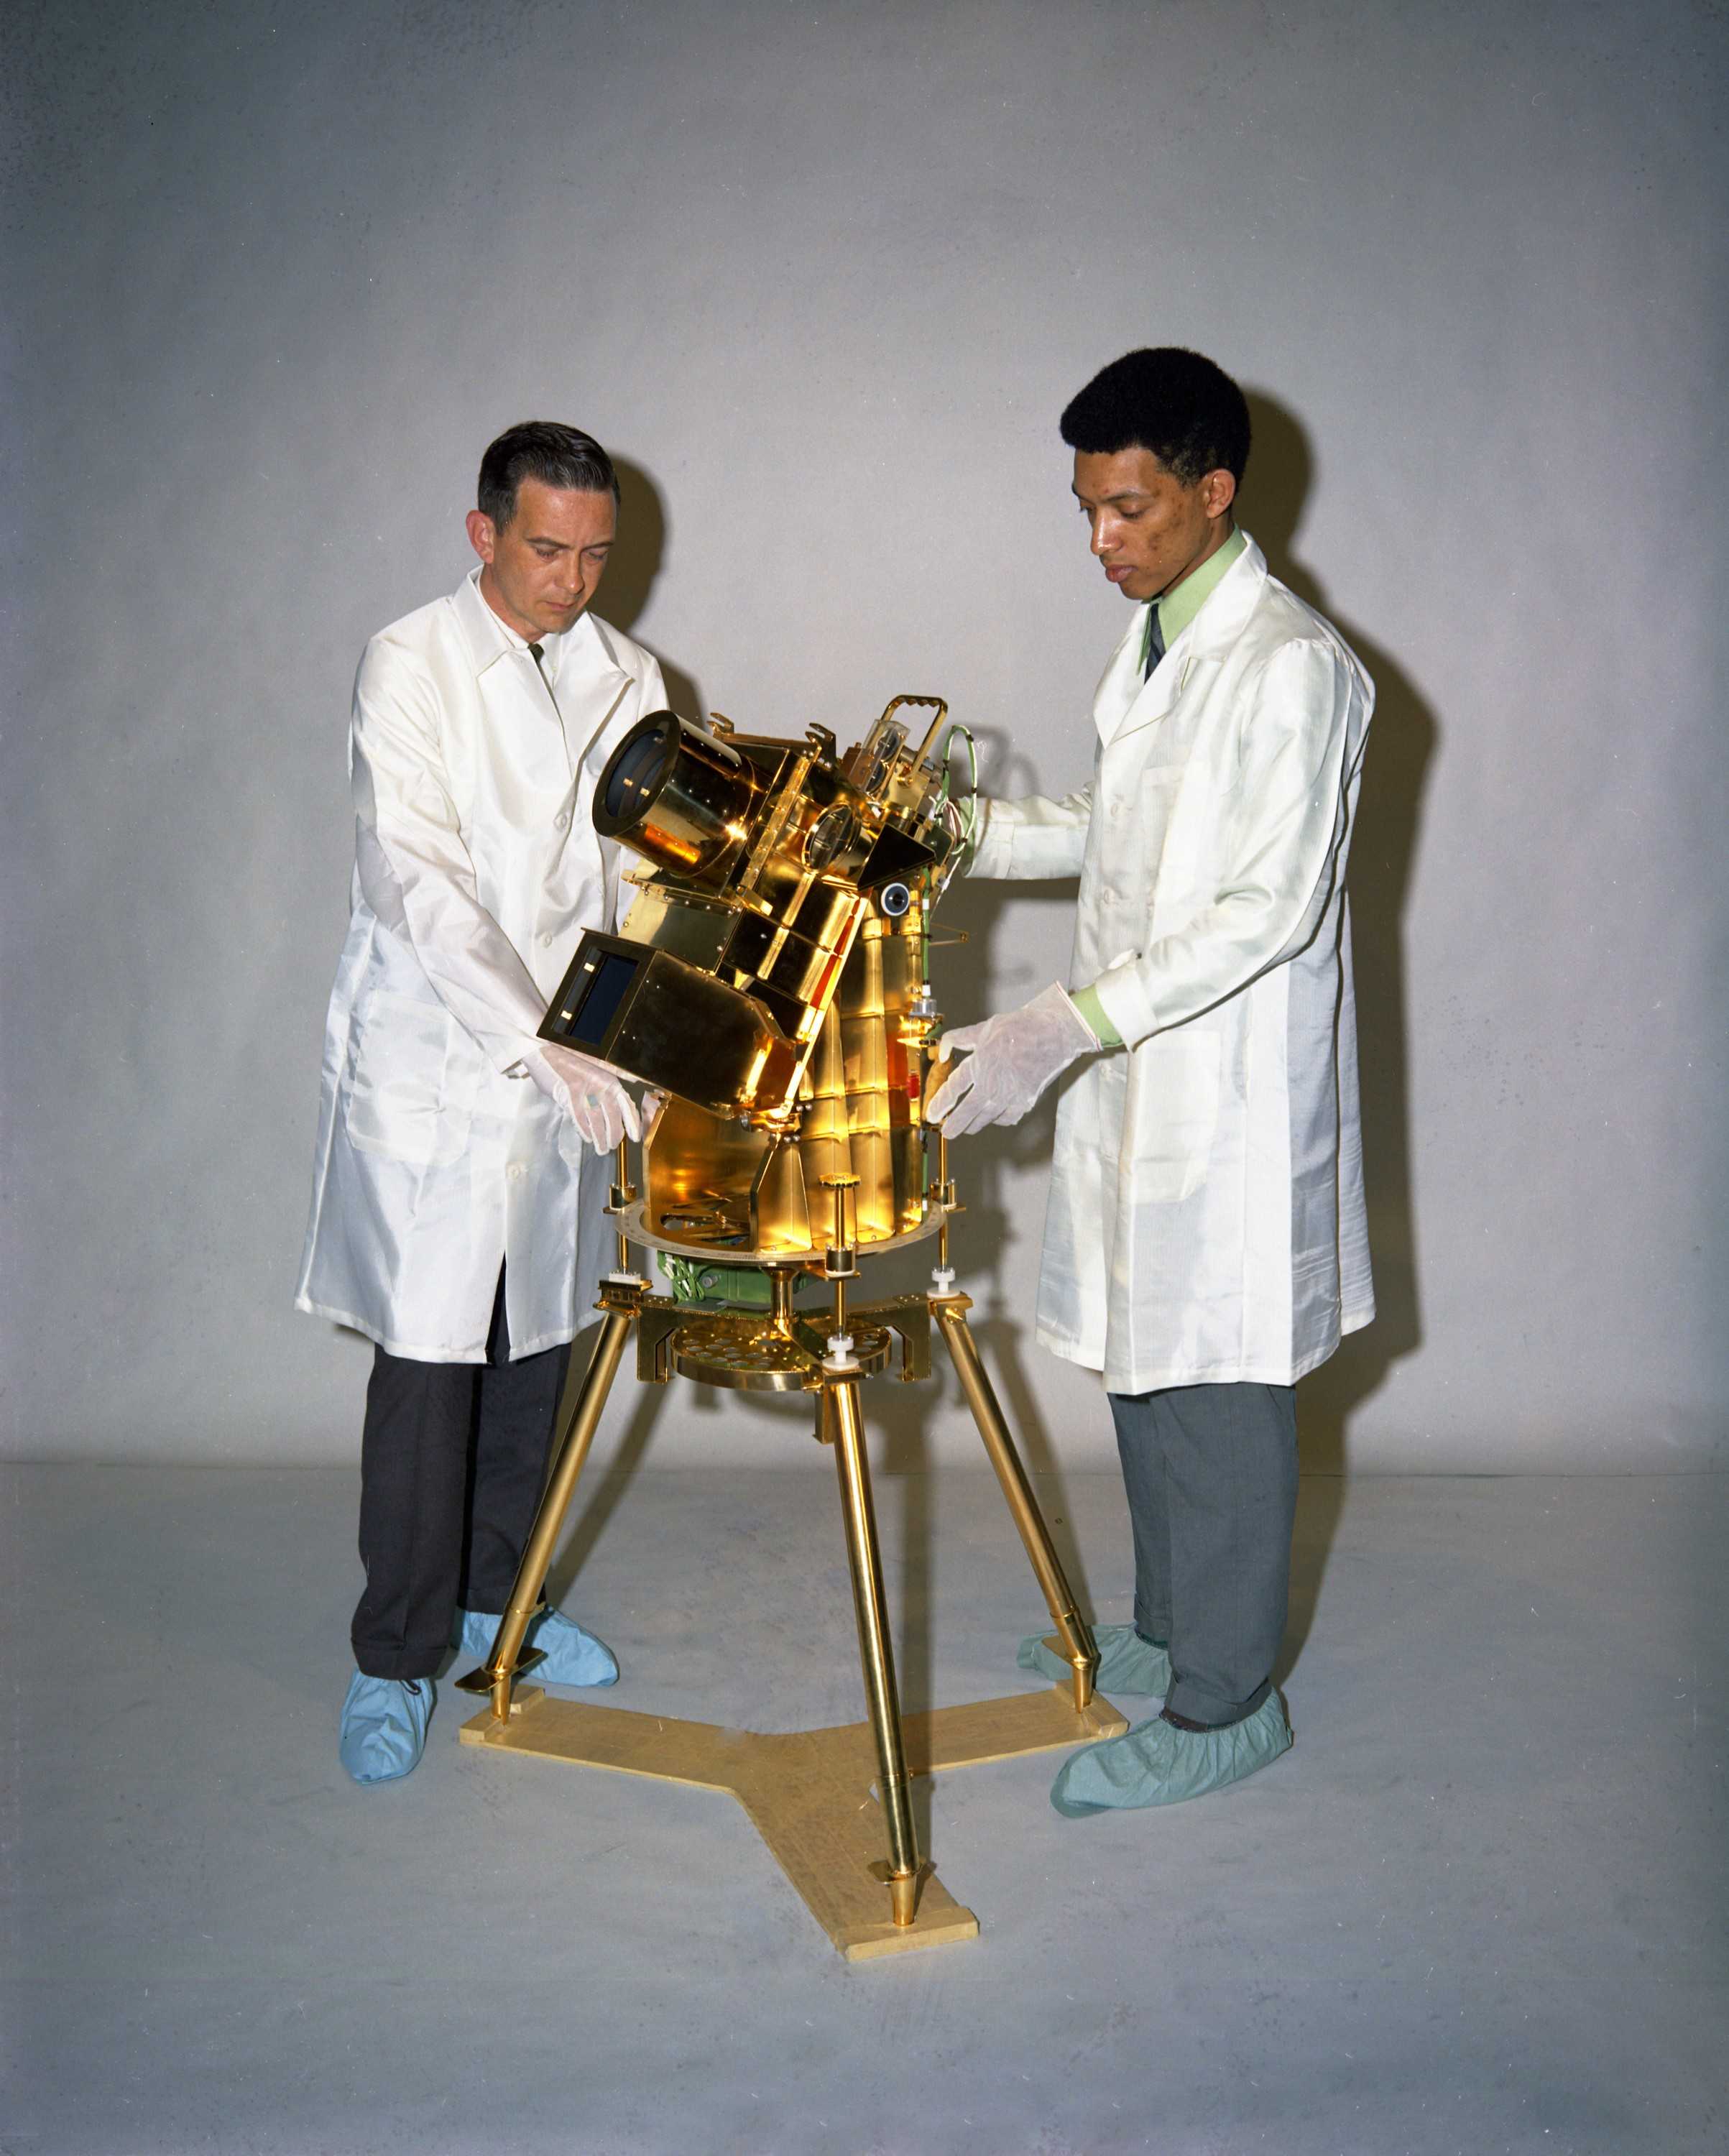 Dr. George Carruthers and another scientist examining a gold-plated ultraviolet camera/spectrograph.